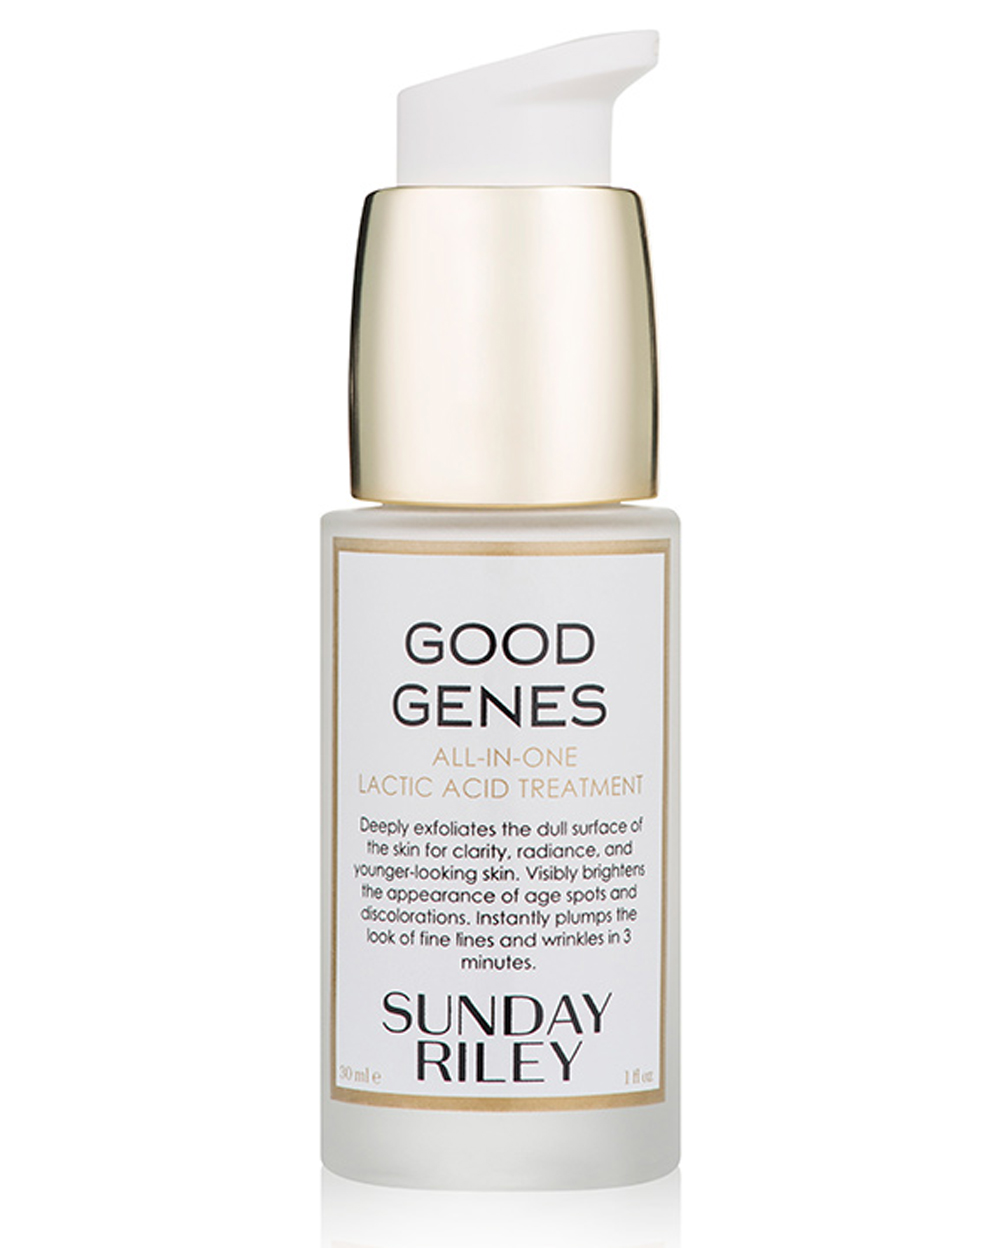 For scarring and pigmentation: Sunday Riley Good Genes All-In-One Lactic Acid Treatment